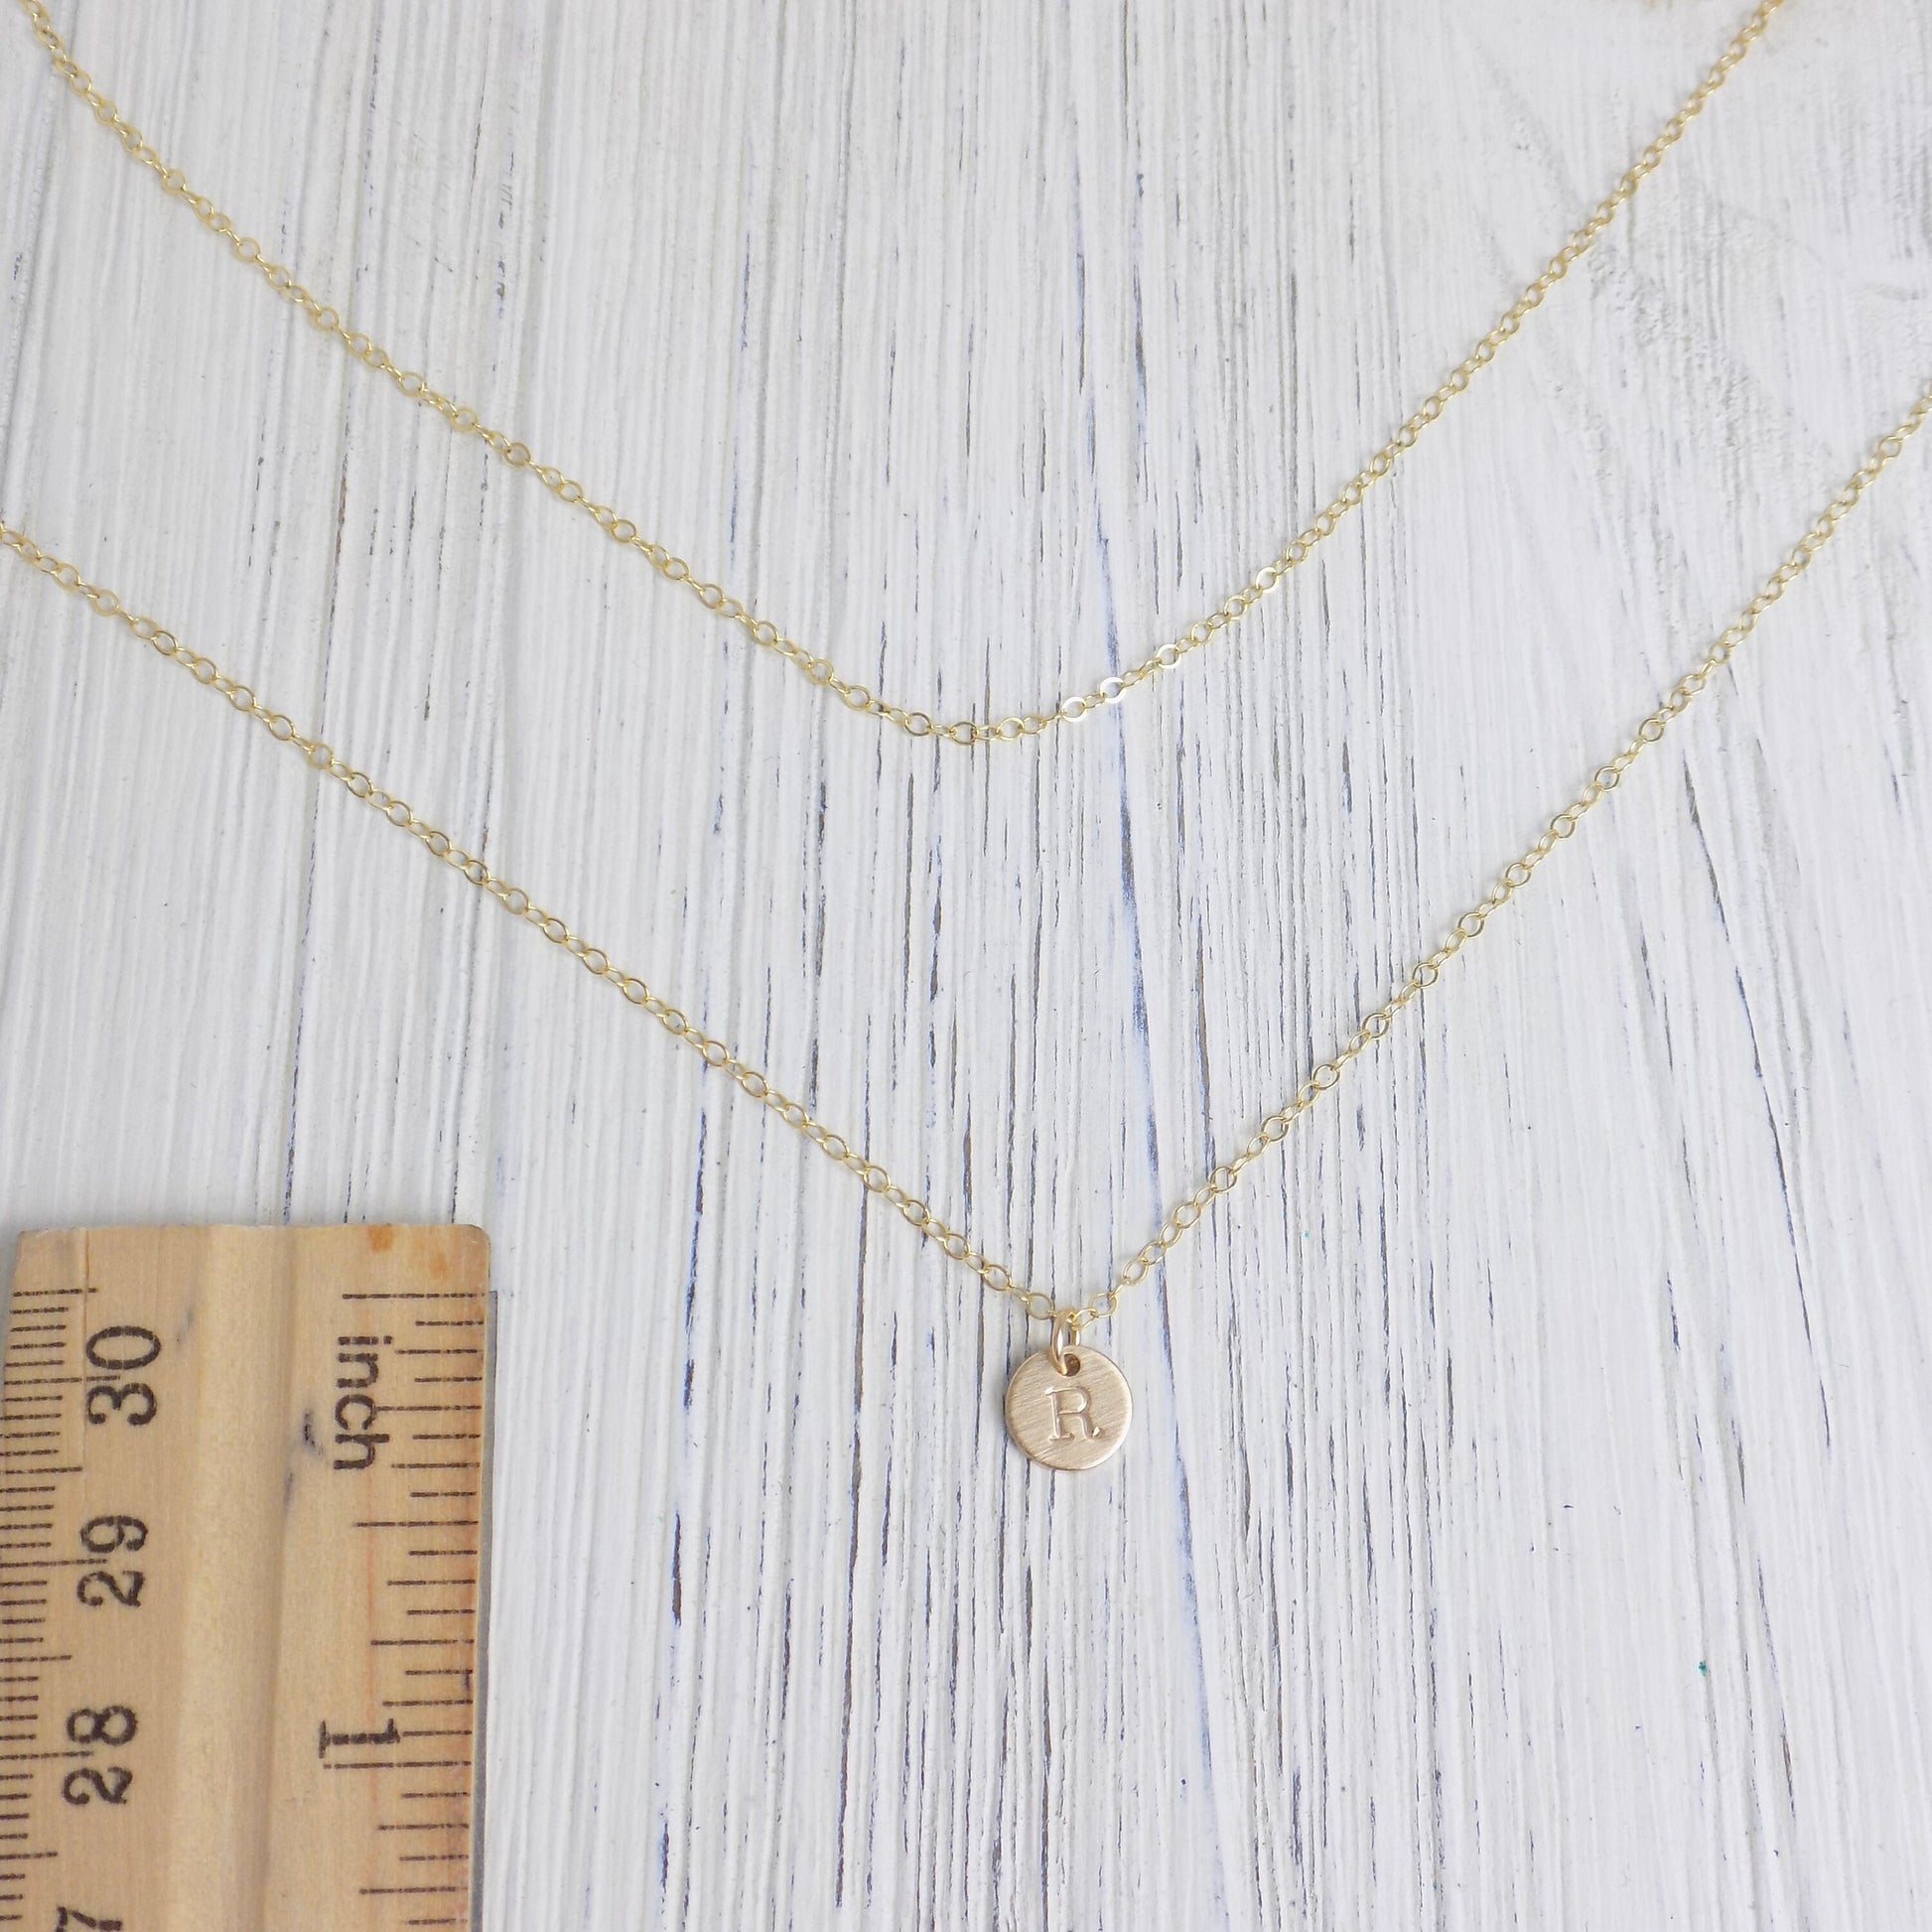 Layered Initial Necklaces For Women - Tiny Initial Necklace Brushed Matte Satin Finish 14K Gold Filled Personalized Initial - Christmas Gift